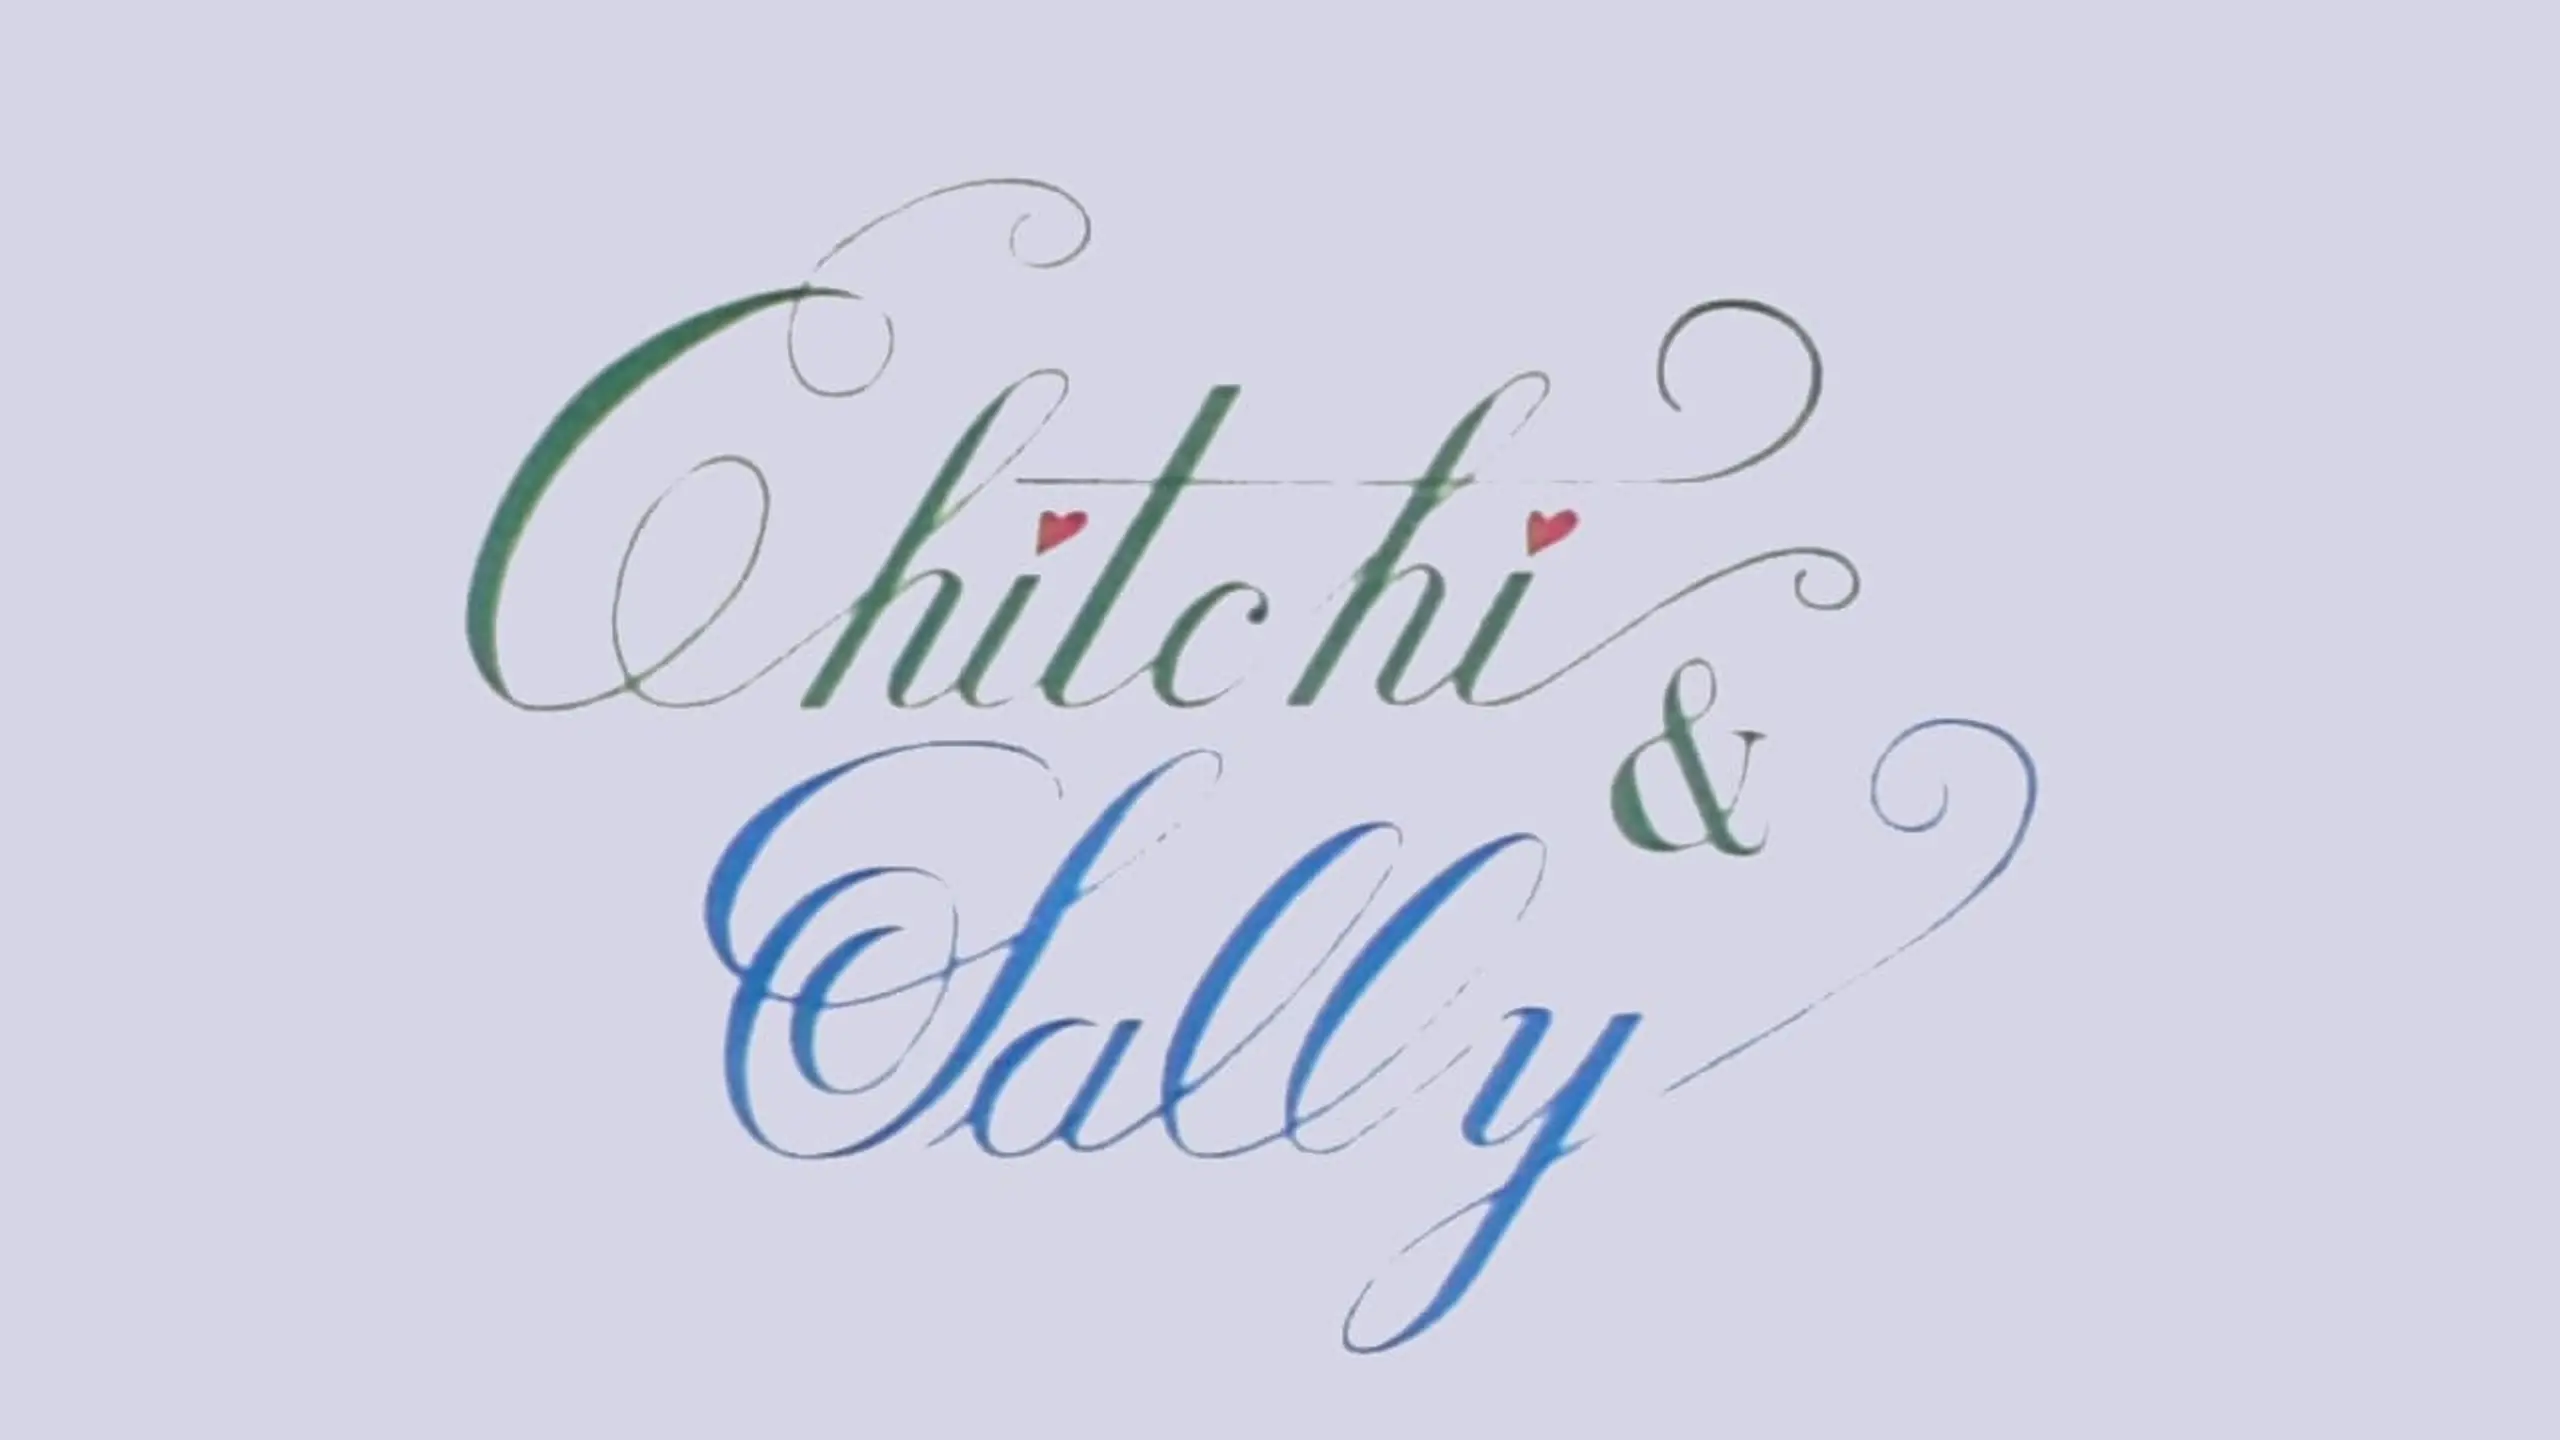 Little Love Story: Chitchi and Sally, Four Seasons of First Love